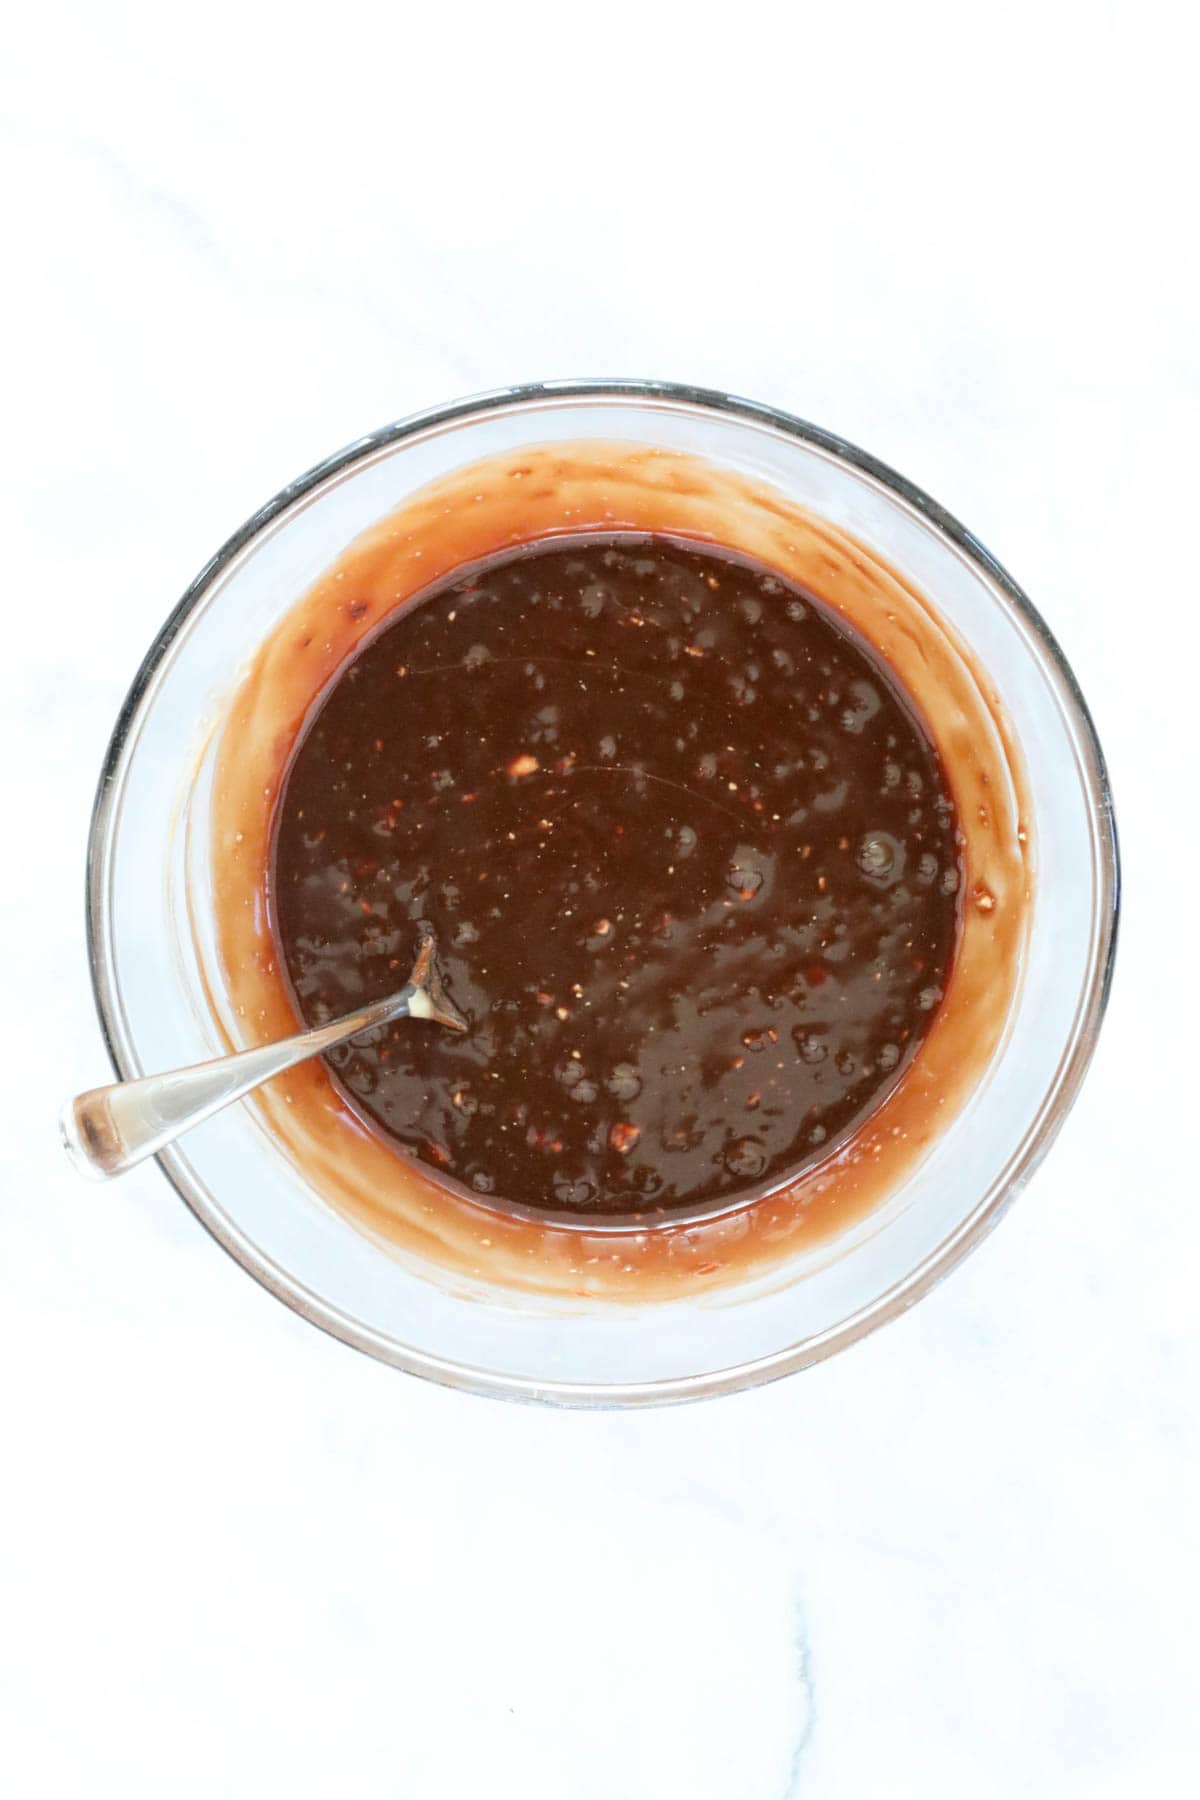 The melted chocolate cream mixture.